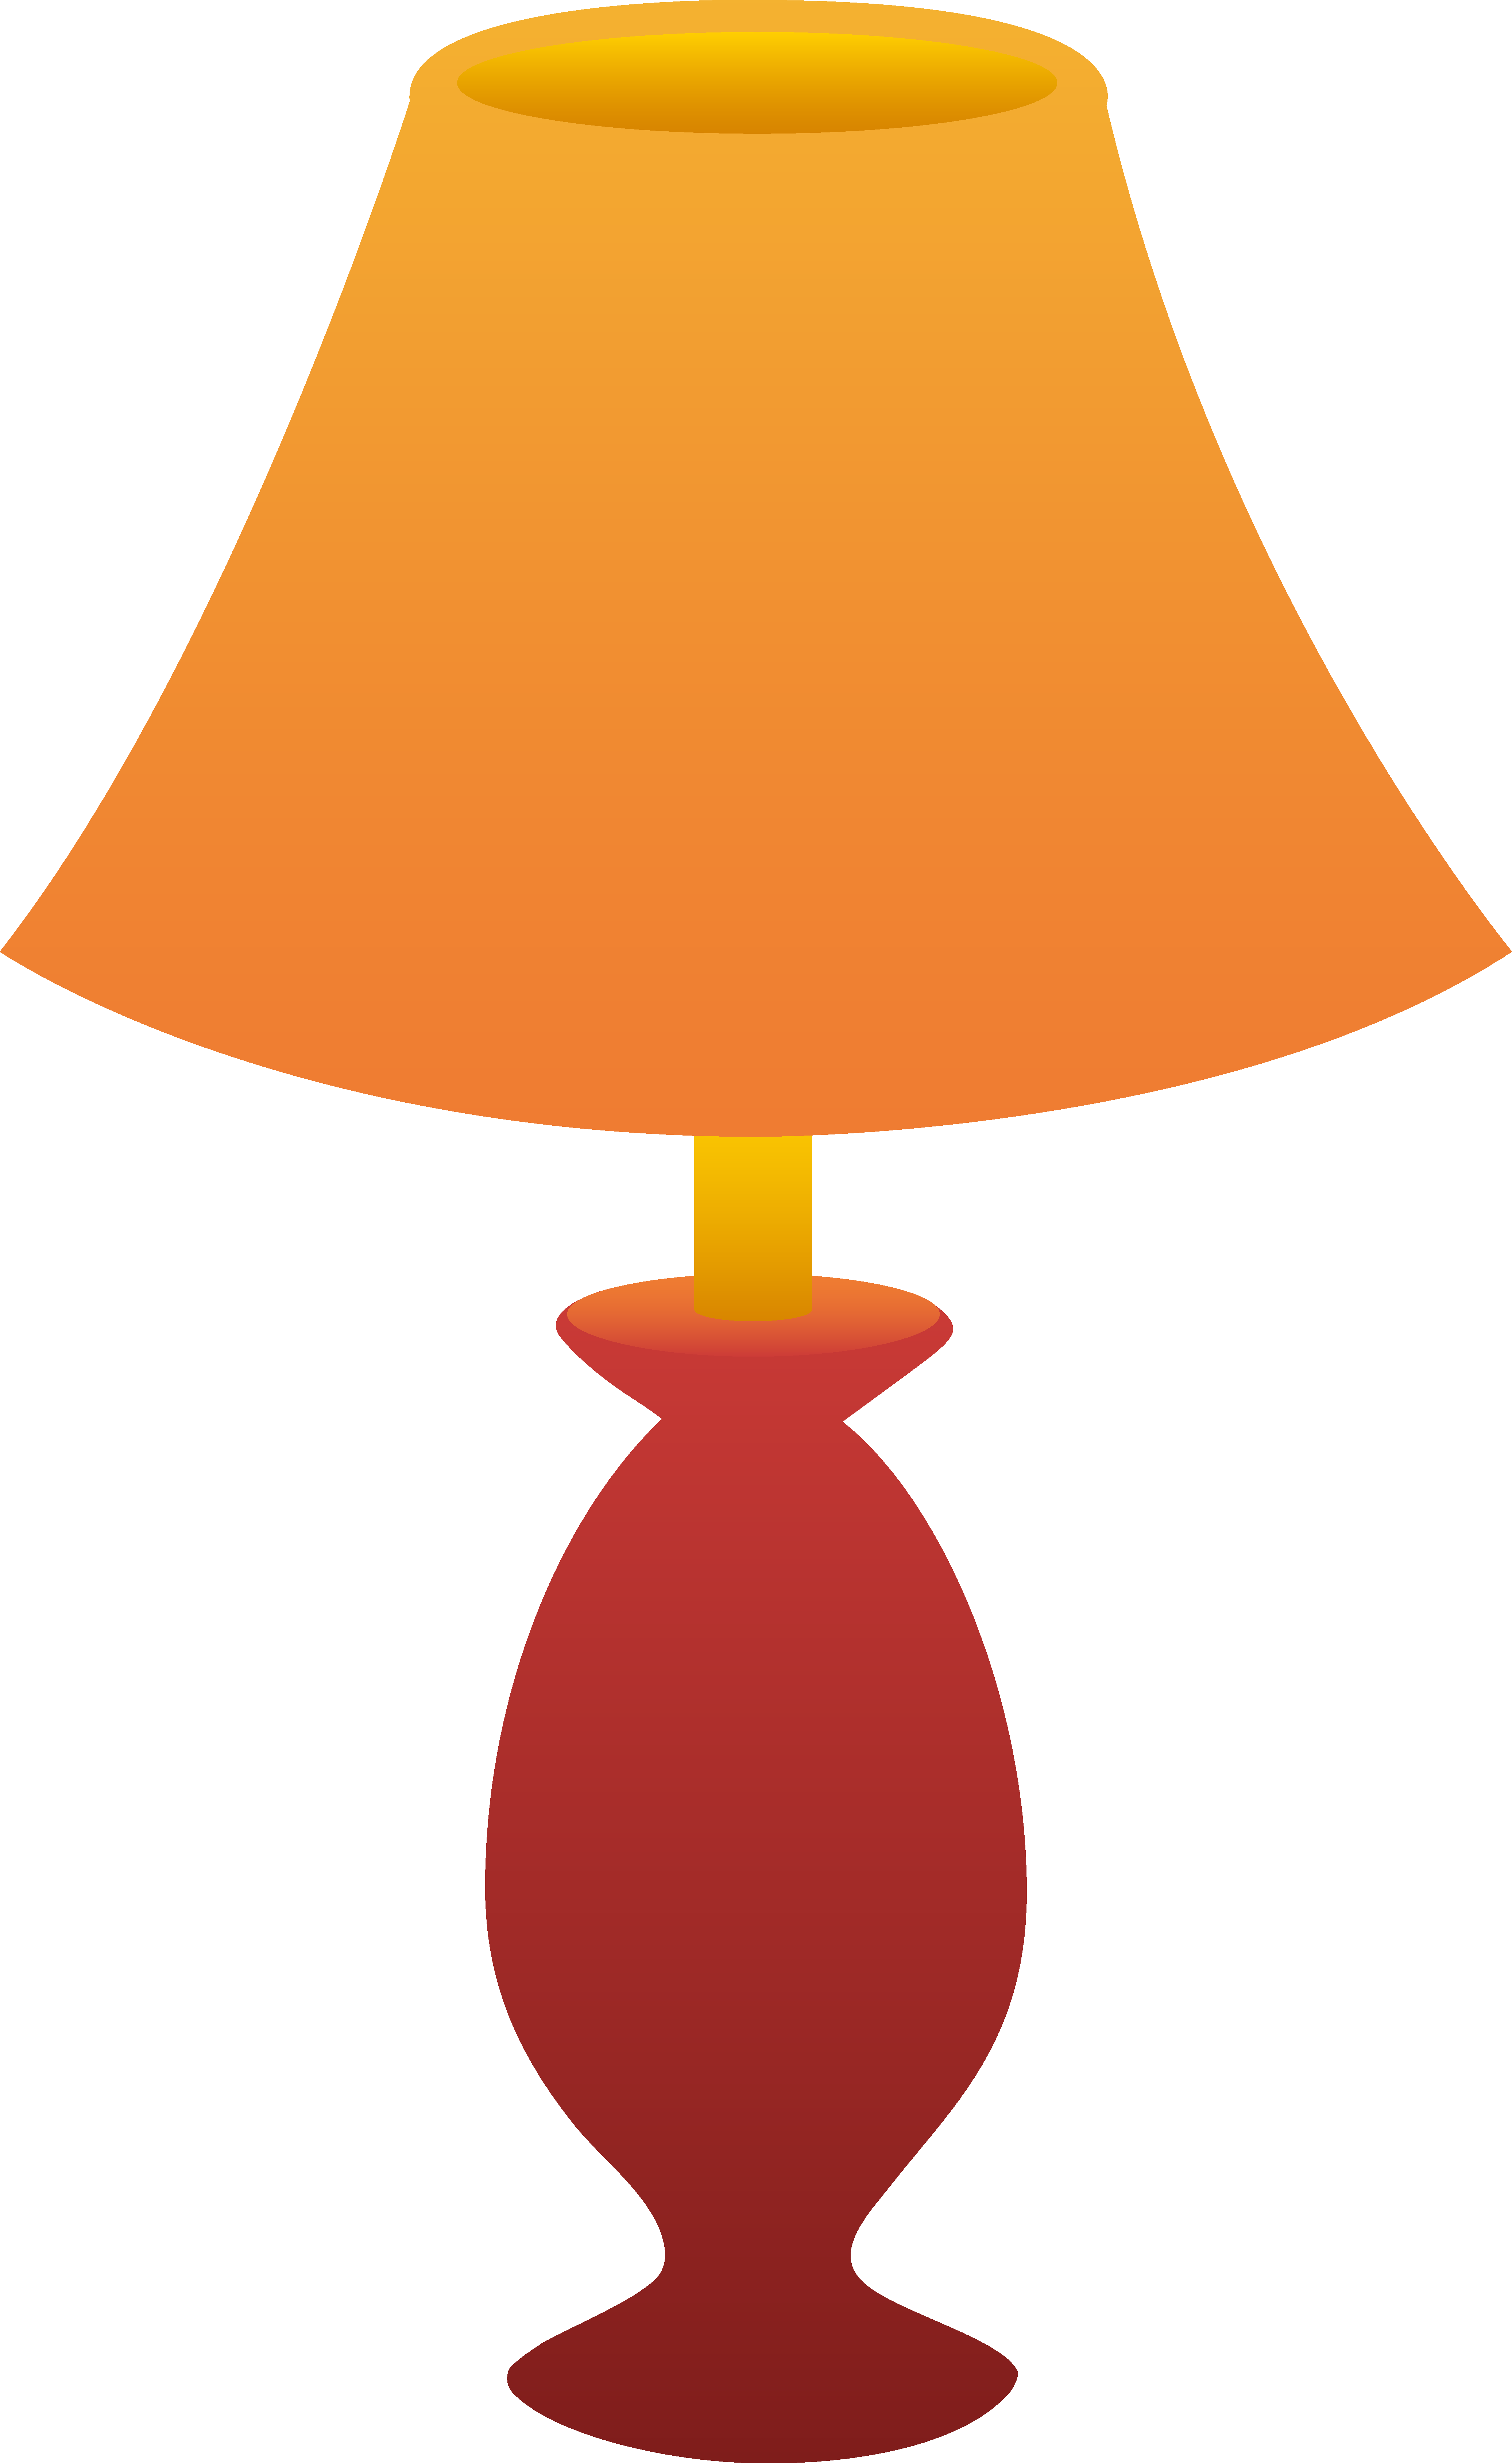 Red Table Lamp - Free Clip Art